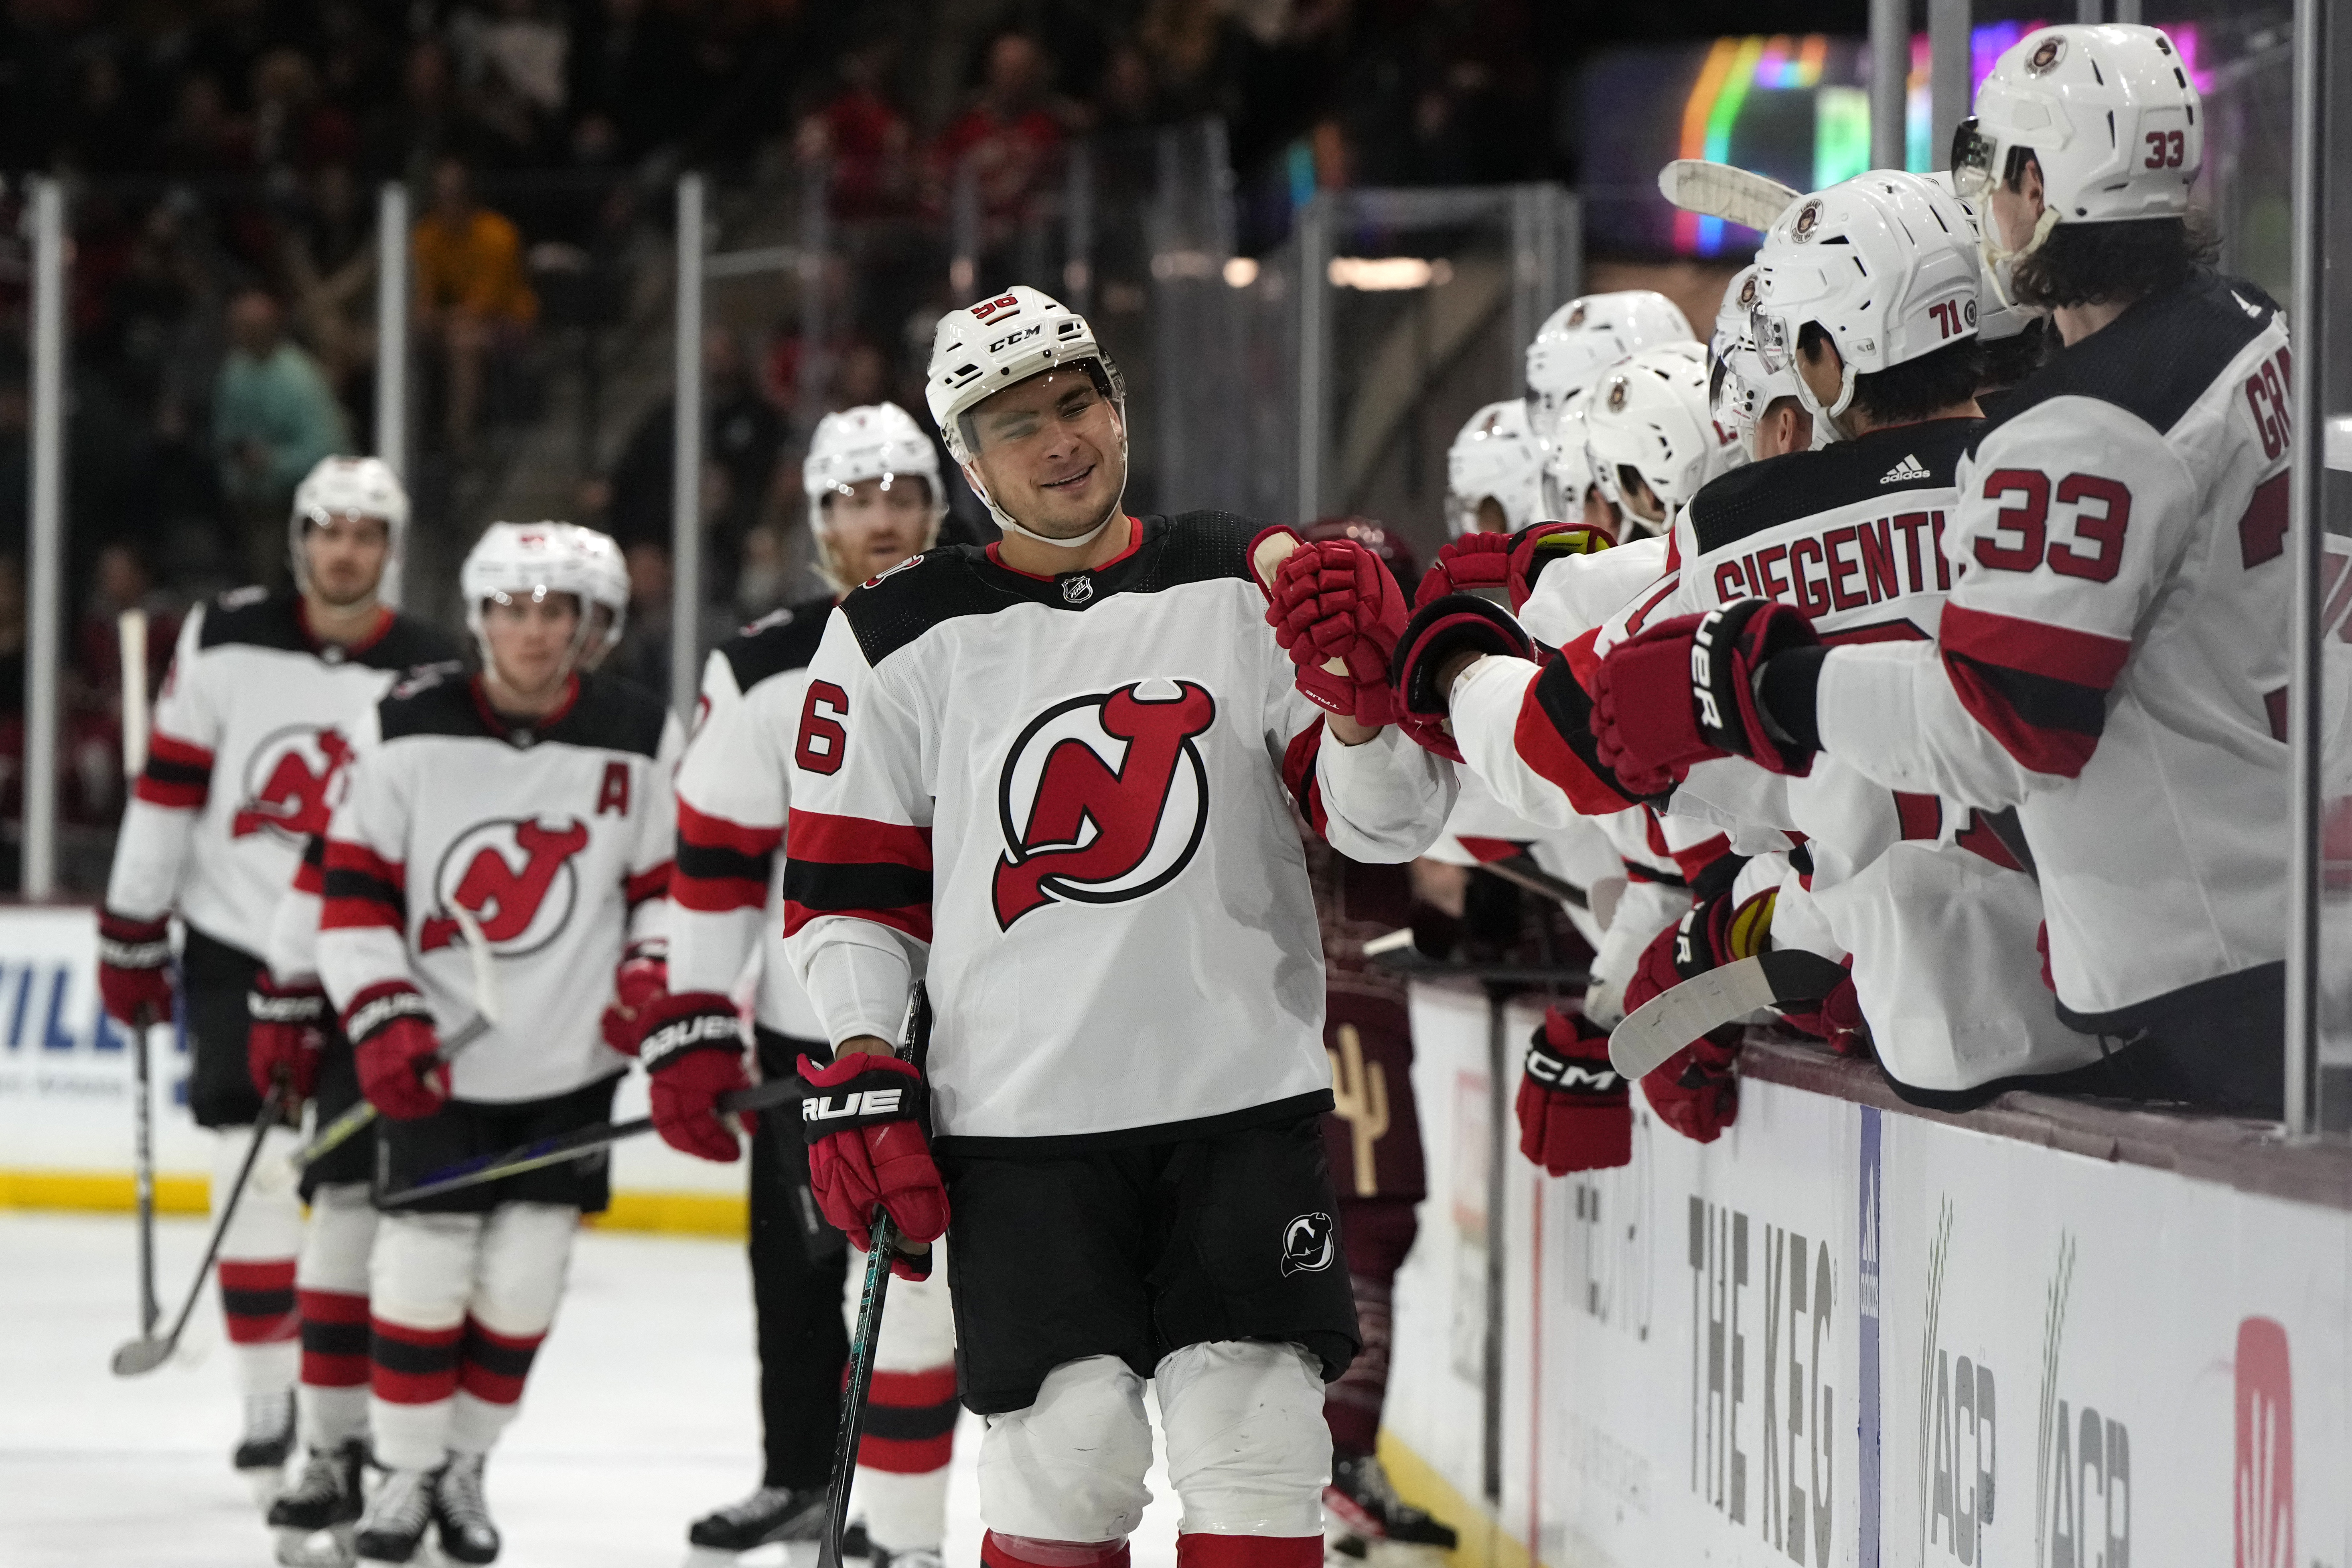 timo meier Archives - Devils Army Network